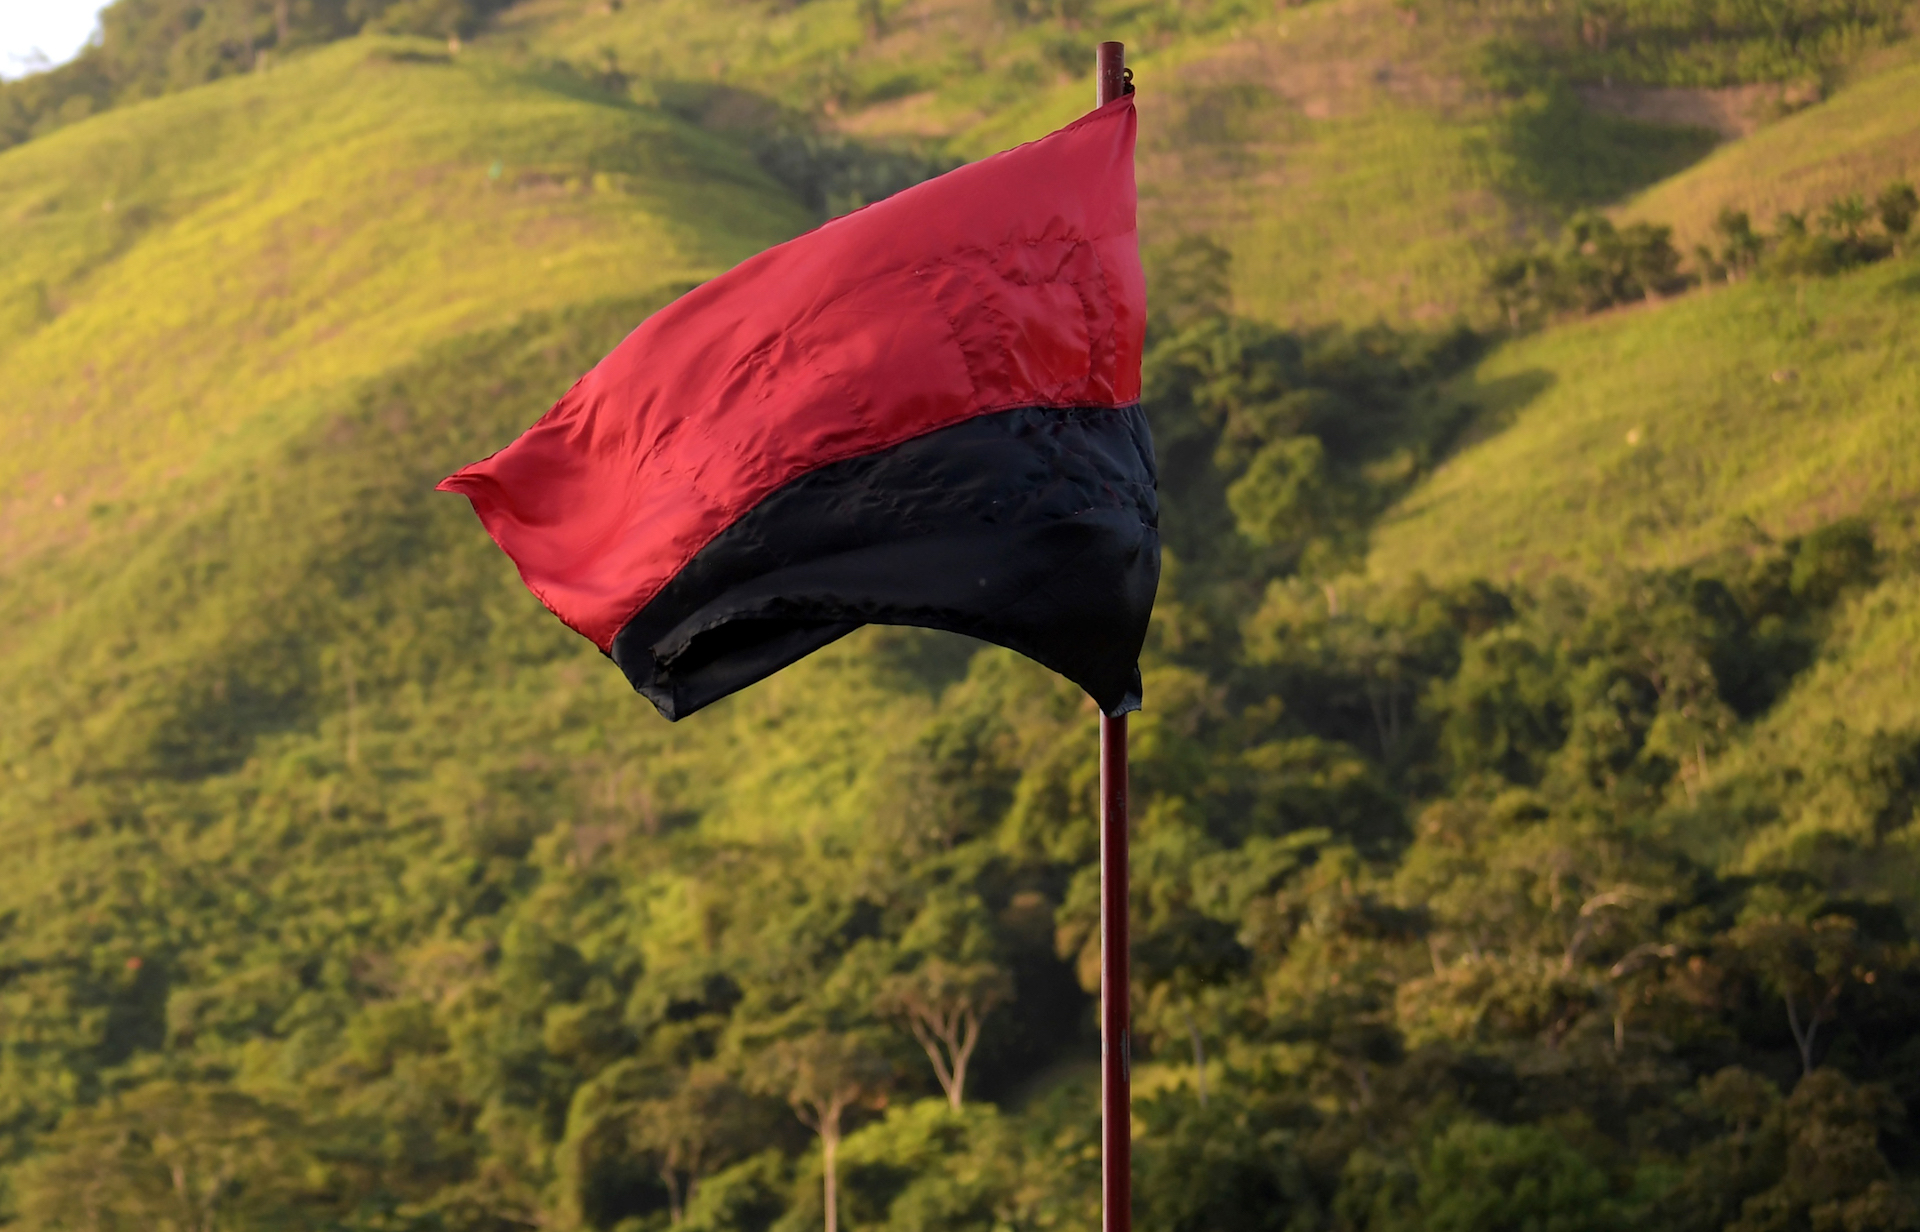 ELN to Continue Kidnappings Despite Ceasefire